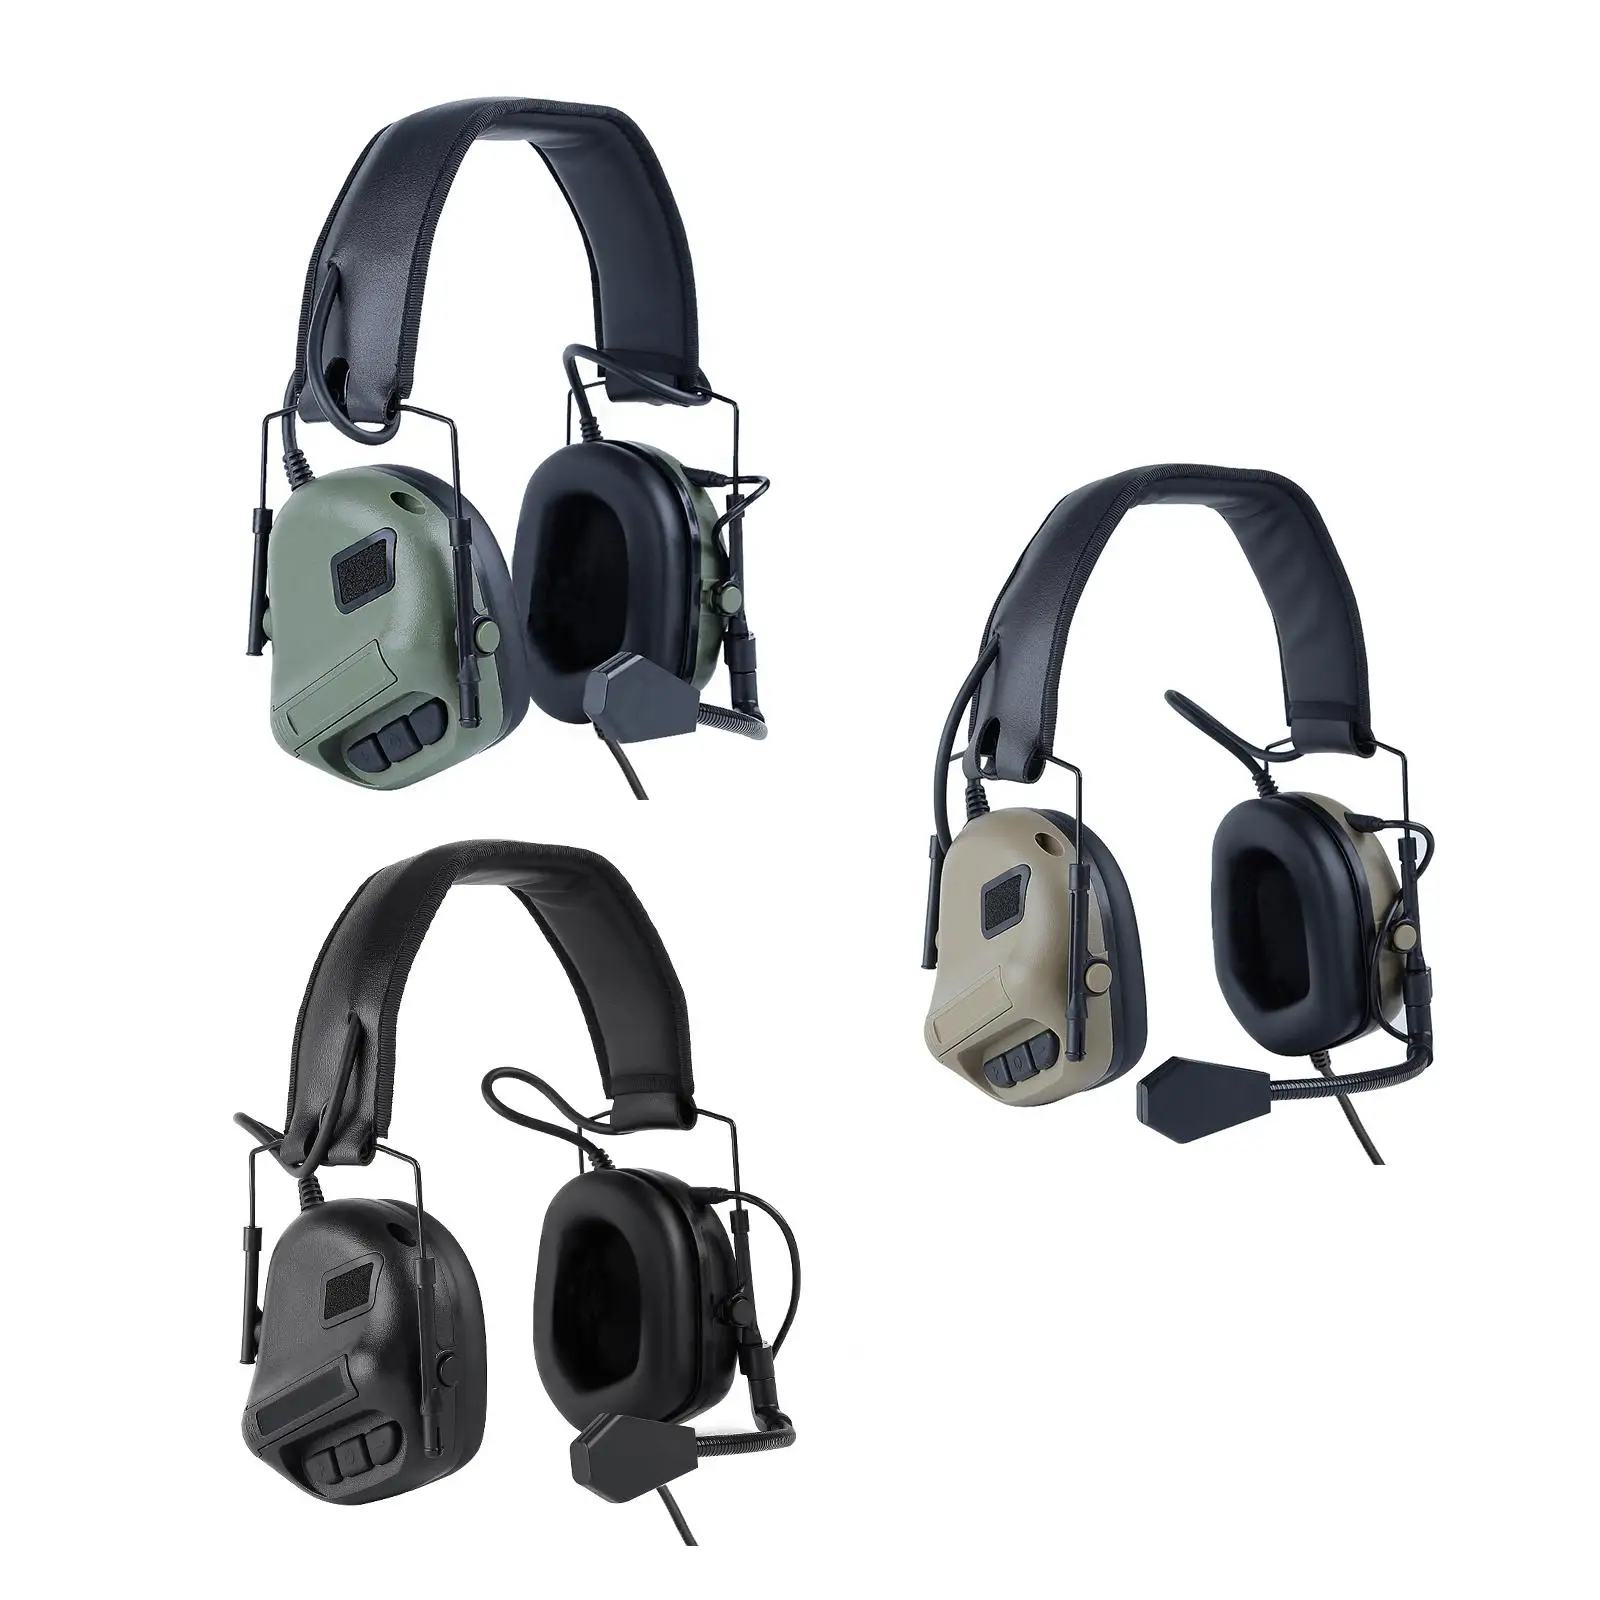 Electronic Ear Muffs Adjustable Ear Protection Noise Cancelling Anti Noise Snr 27dB for Shooting Construction Team Activities